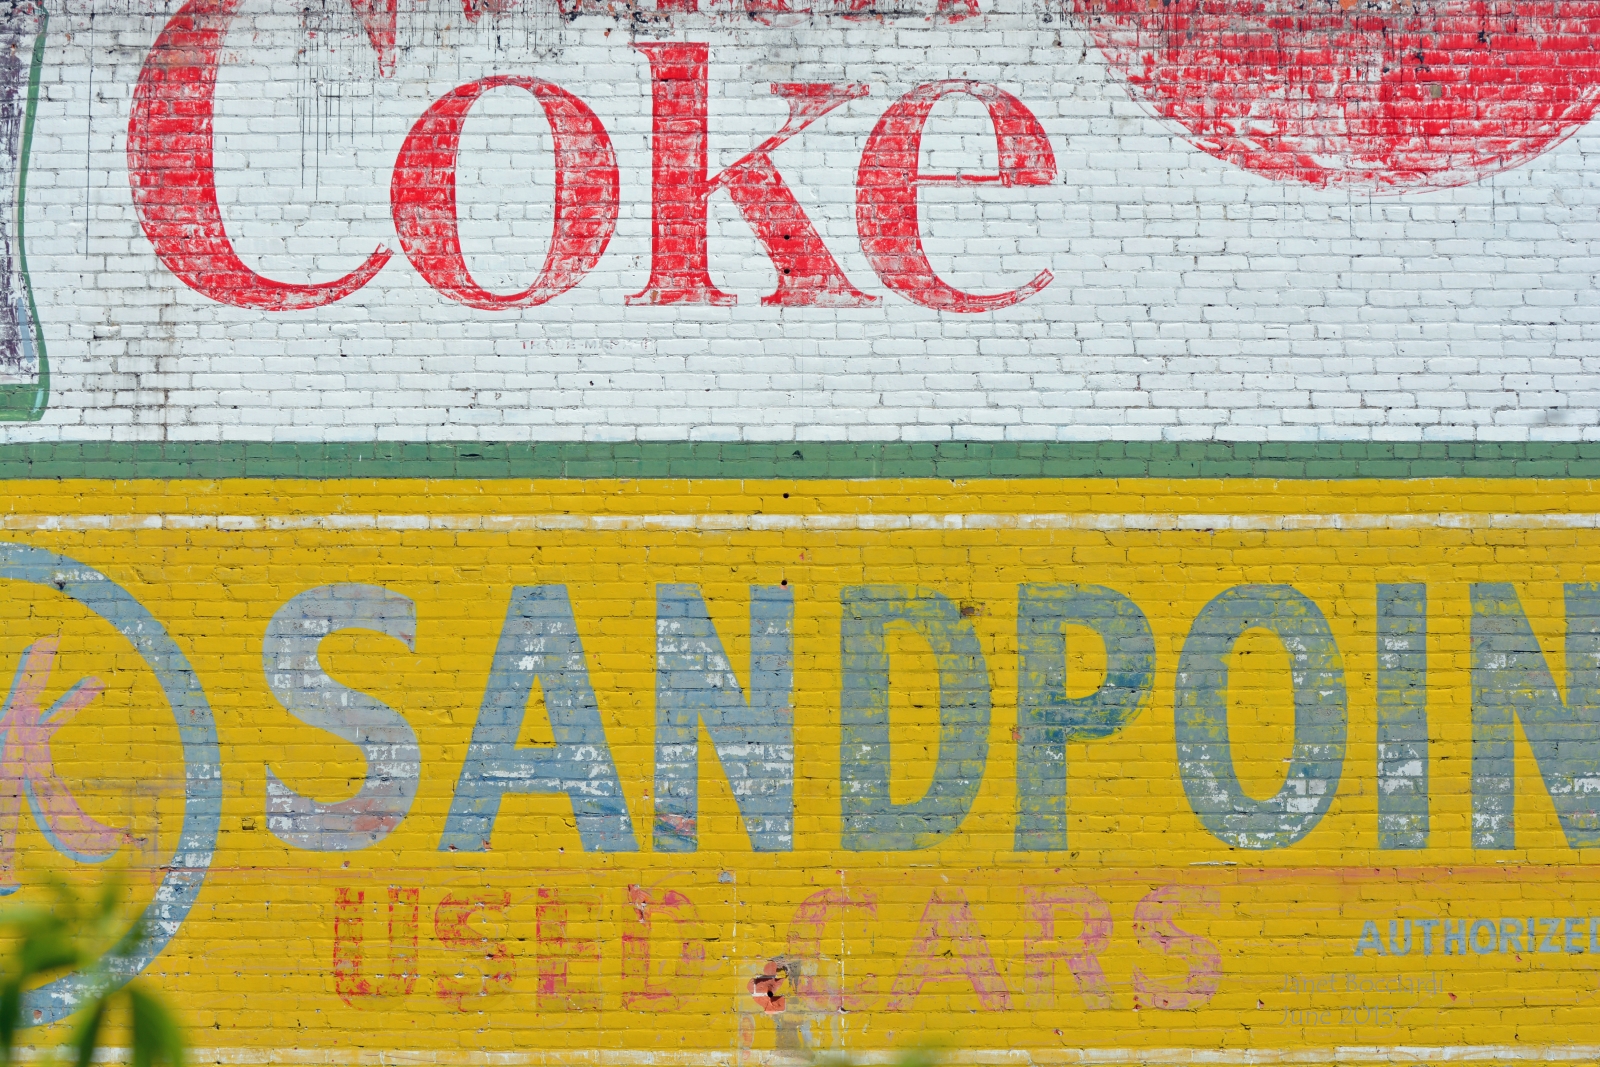 Old painted Coke sign on side of building